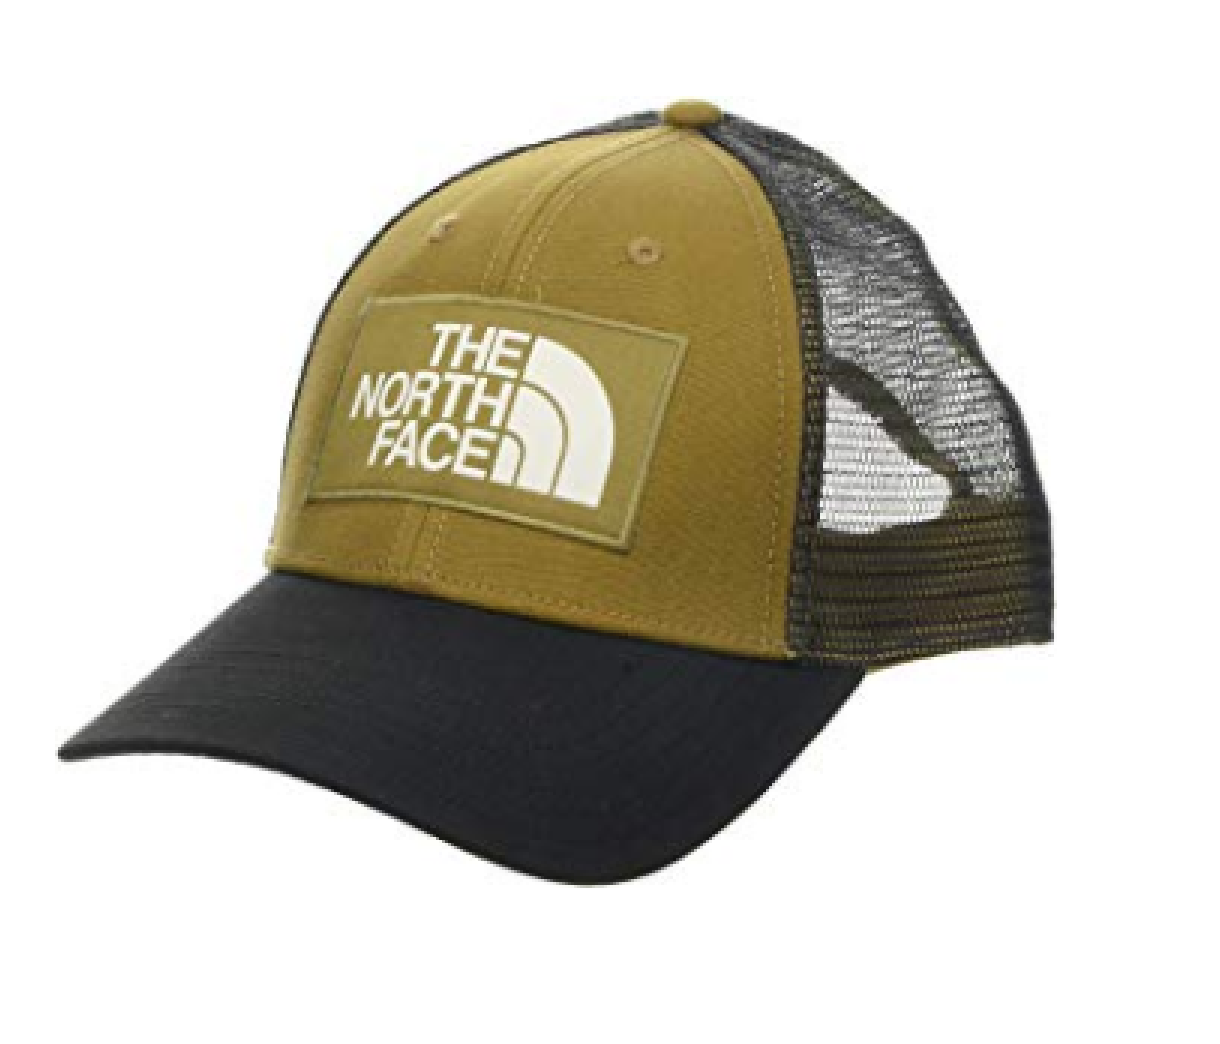 Gorra The North Face Unisex solo 19,4€